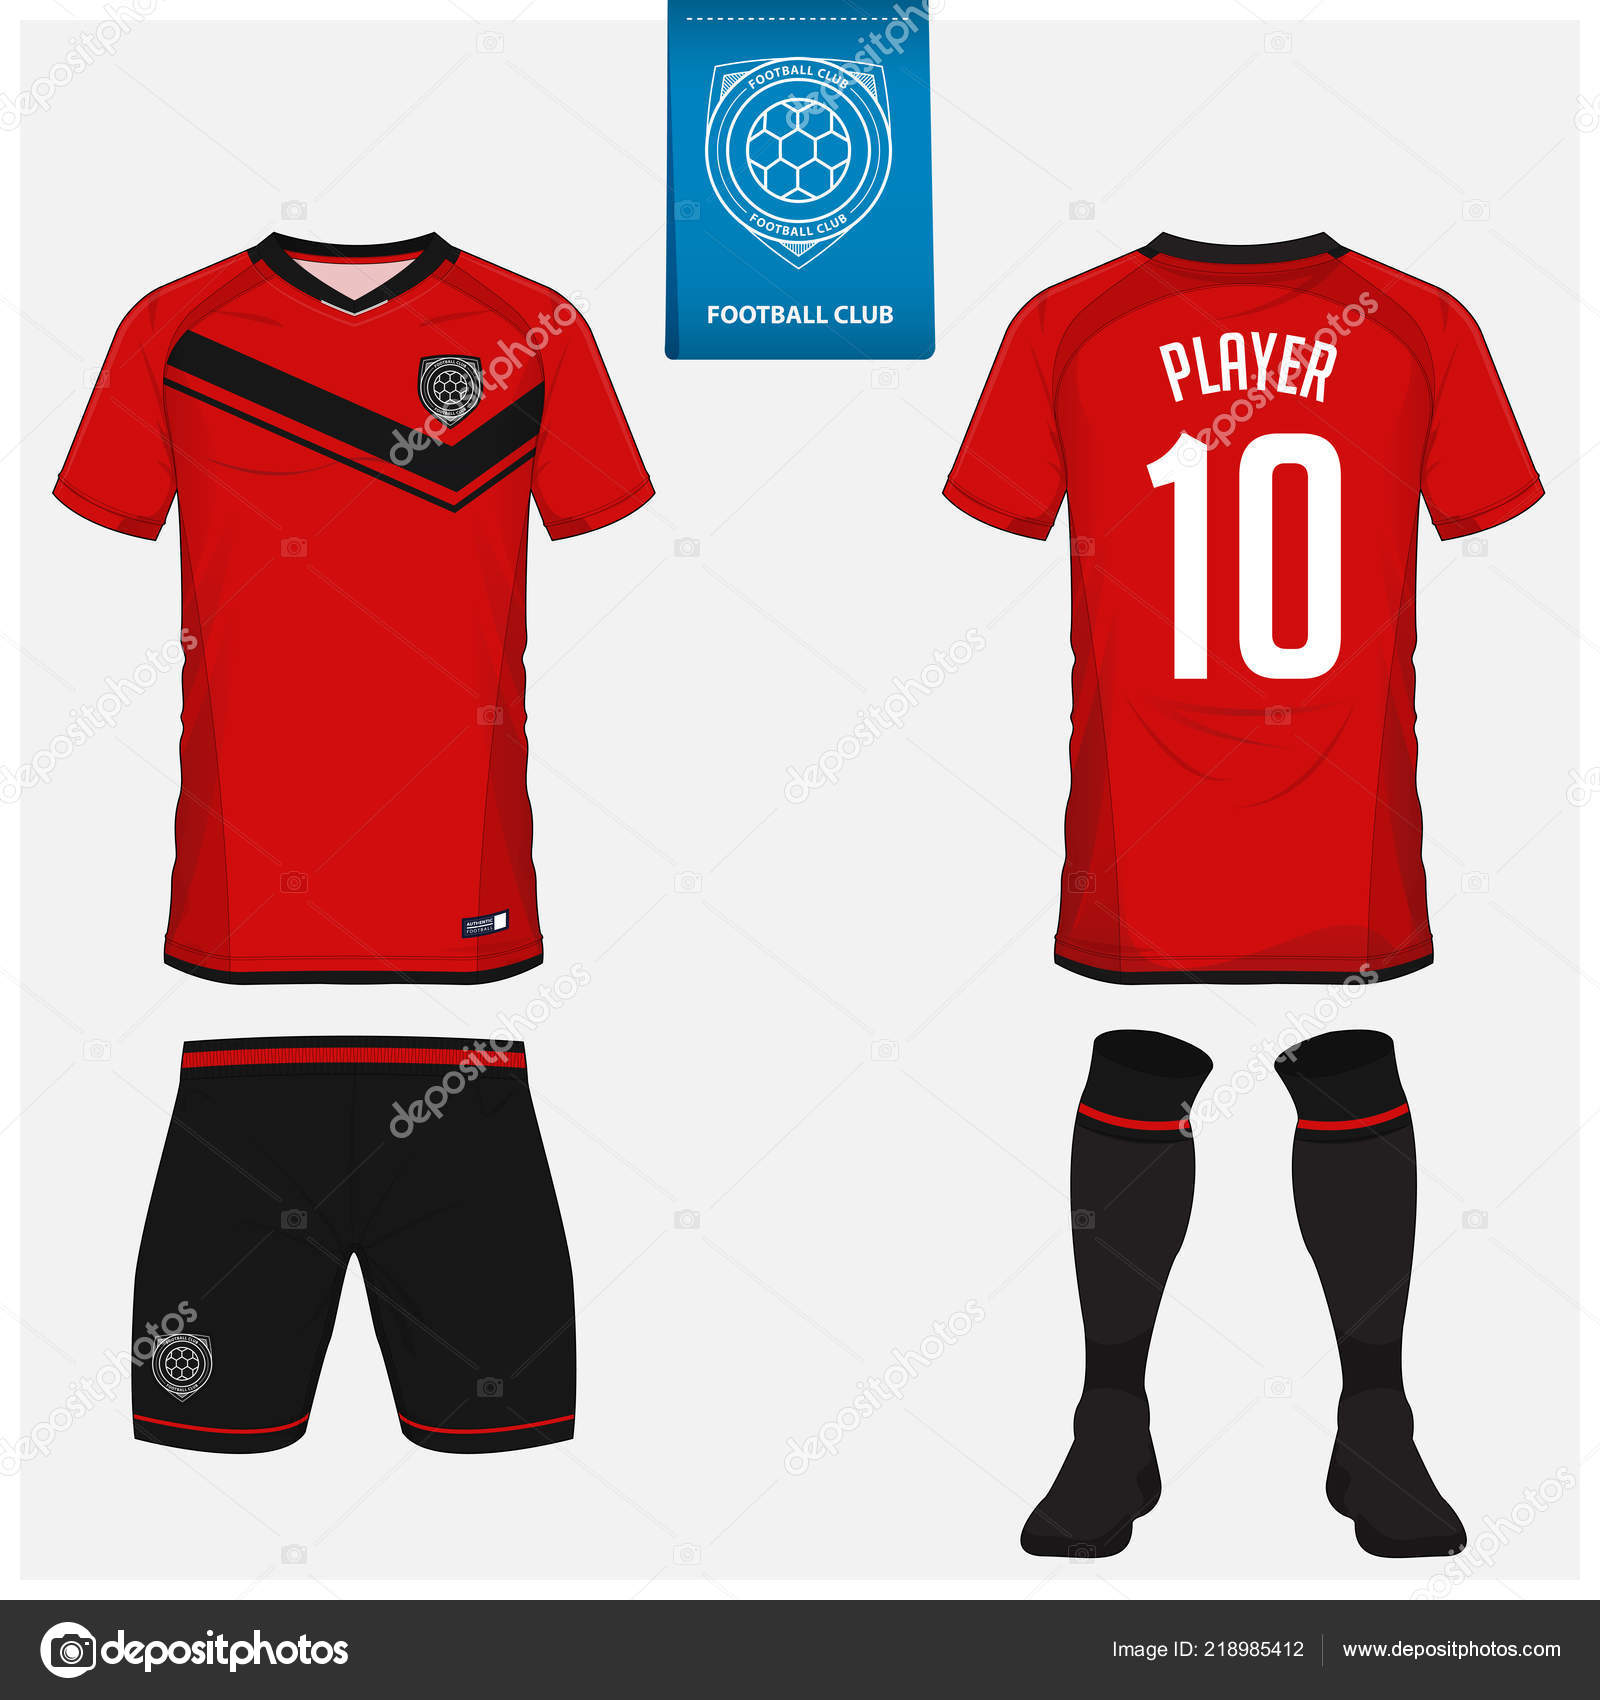 shorts and socks Details about   Soccer Uniforms:$18 each Jerseys with #s only 